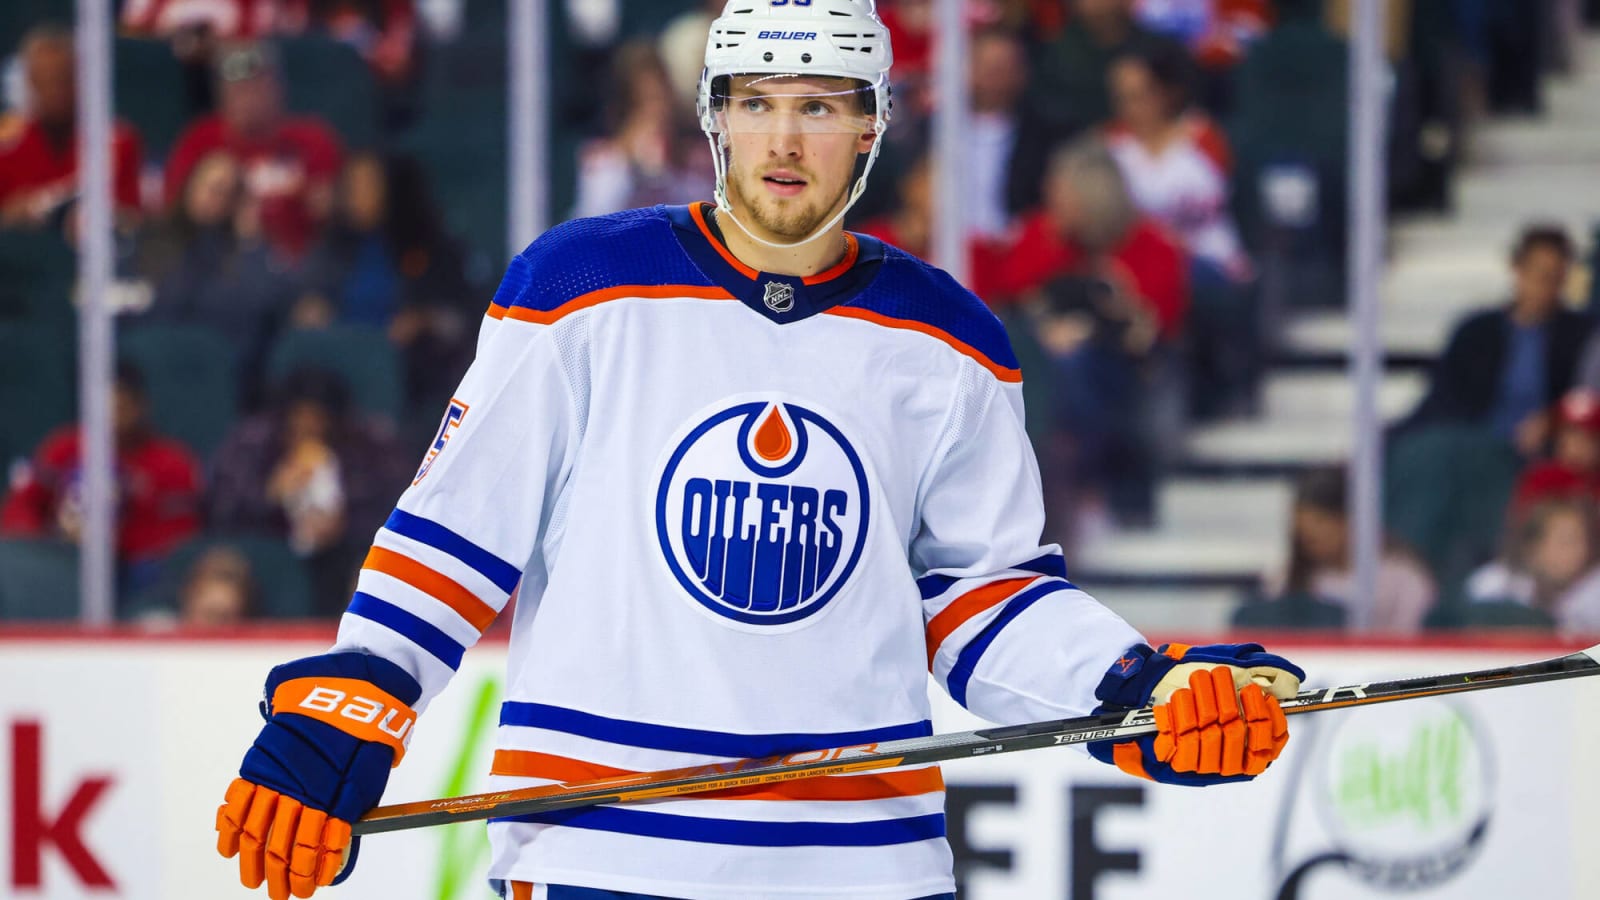 Set to play alongside Raphael Lavoie in AHL, Oilers prospect Dylan Holloway’s return delayed